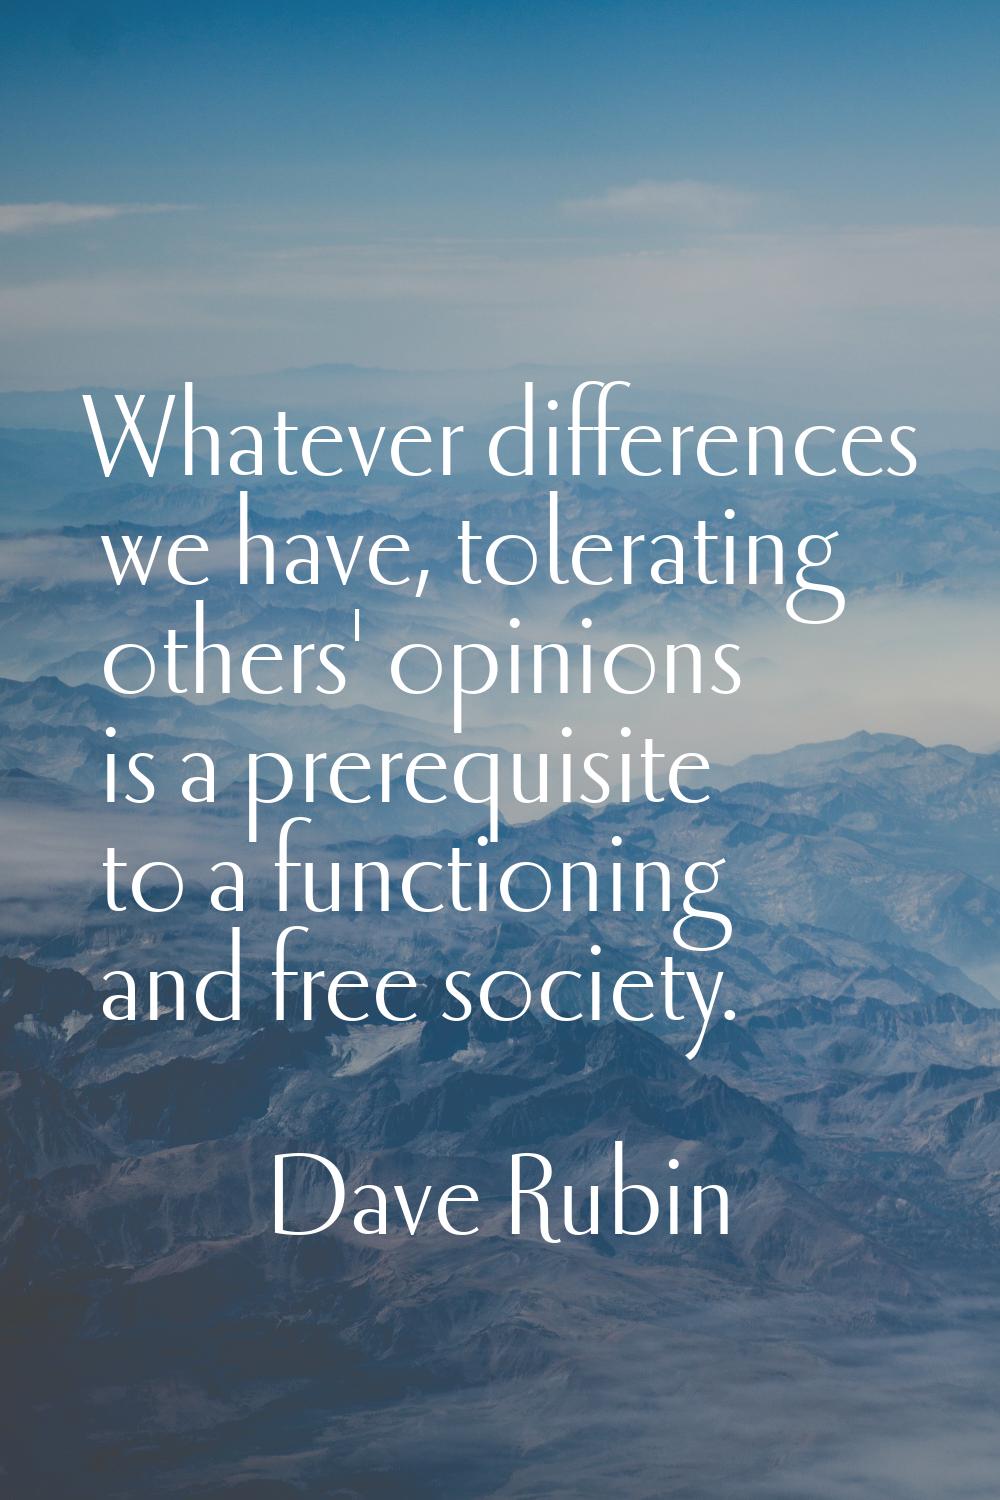 Whatever differences we have, tolerating others' opinions is a prerequisite to a functioning and fr